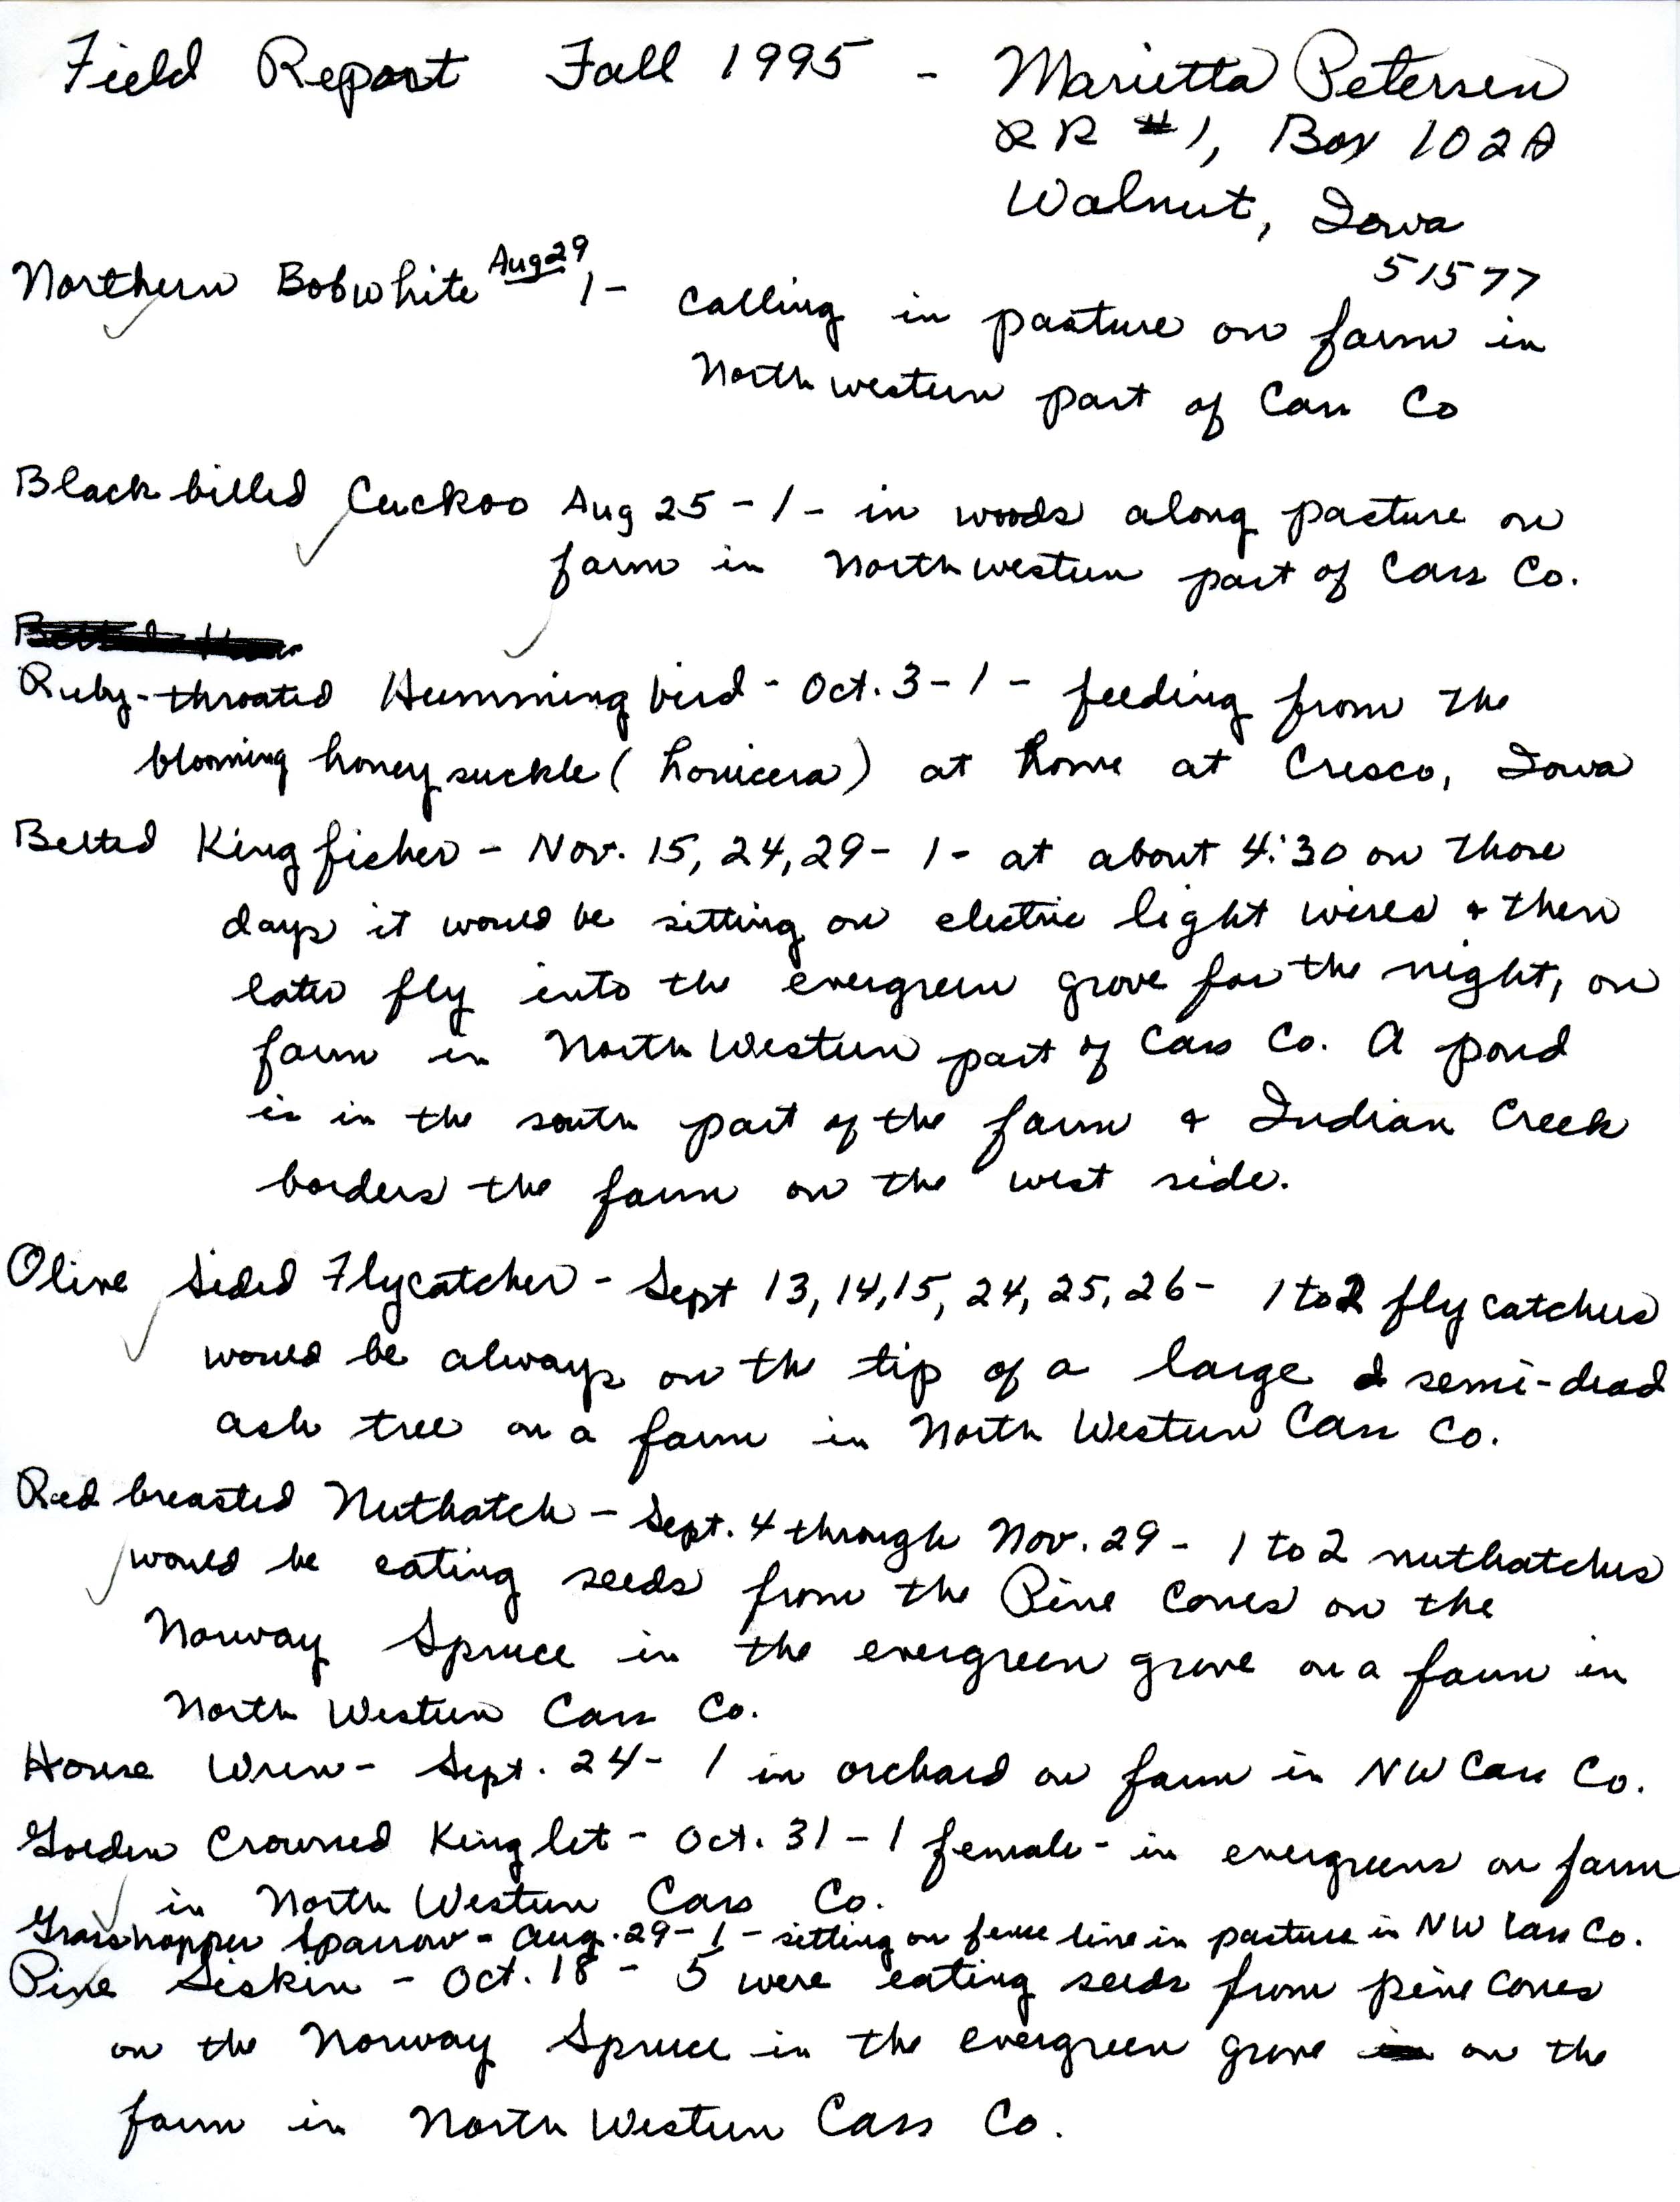 Field notes contributed by Marietta Petersen, fall 1995